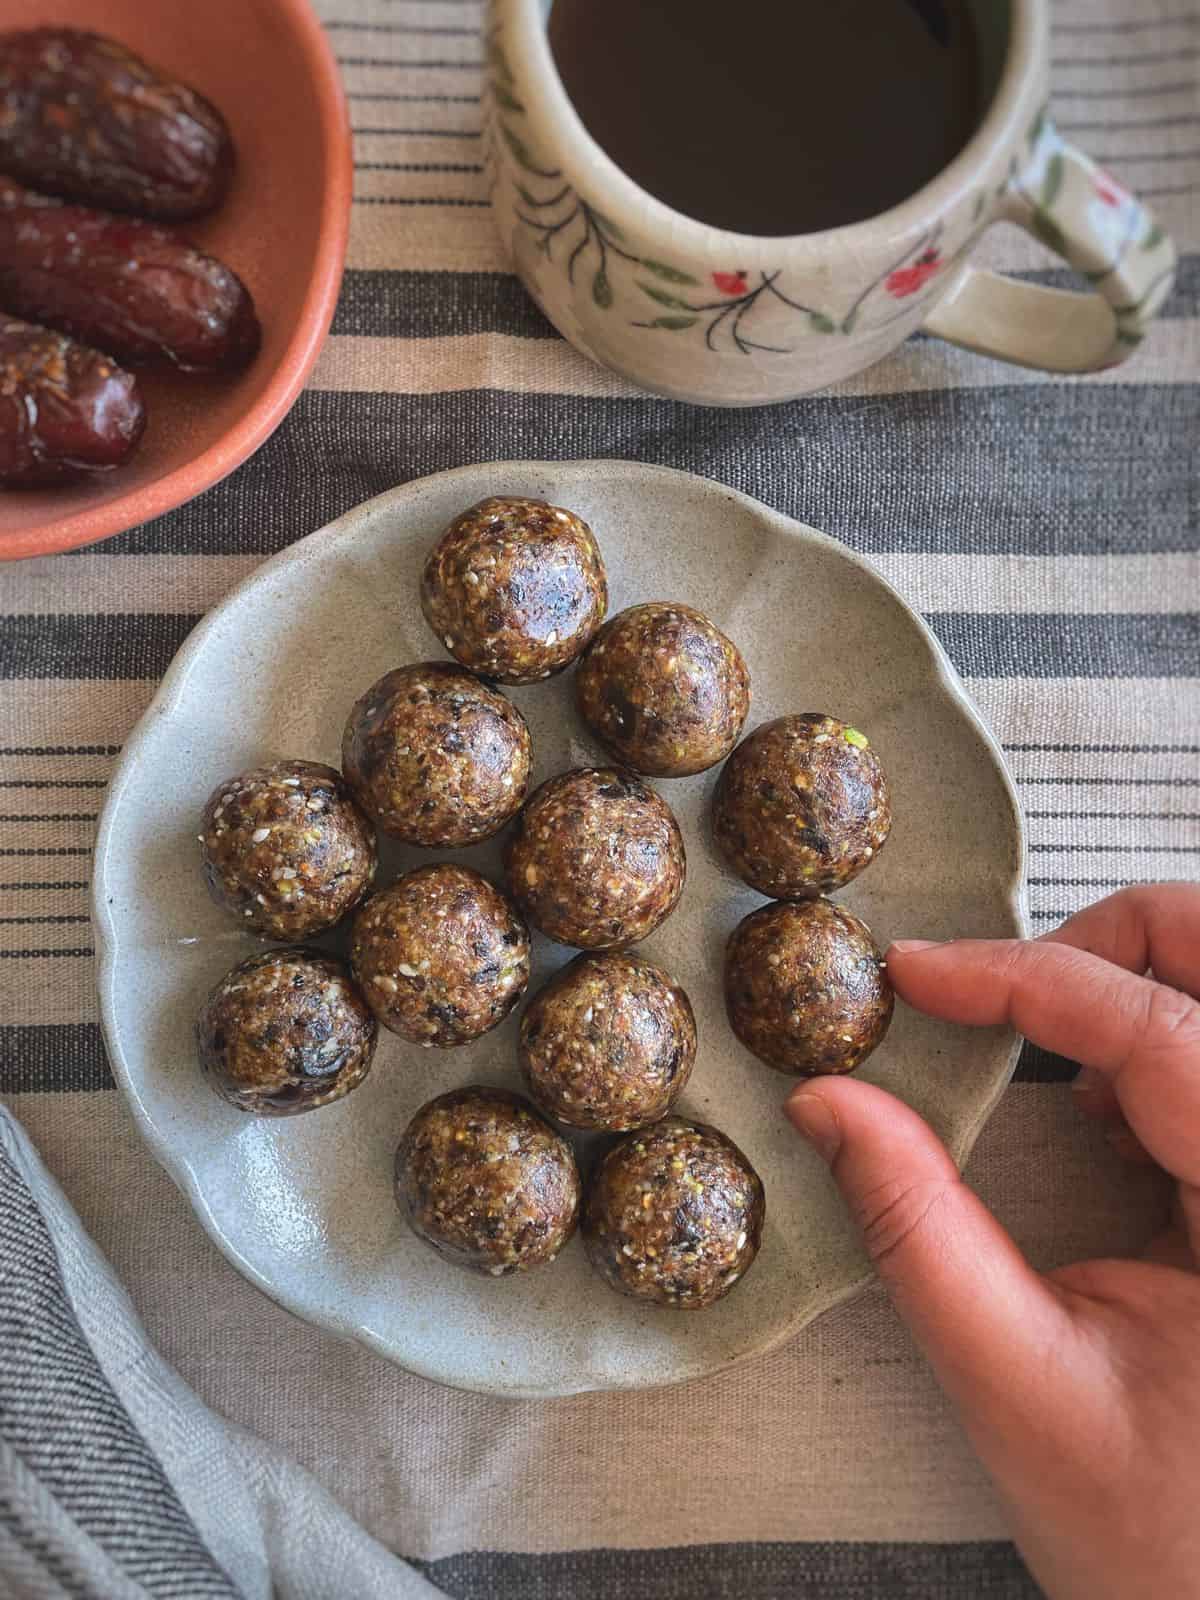 A plate of energy balls with a hand picking one of them.